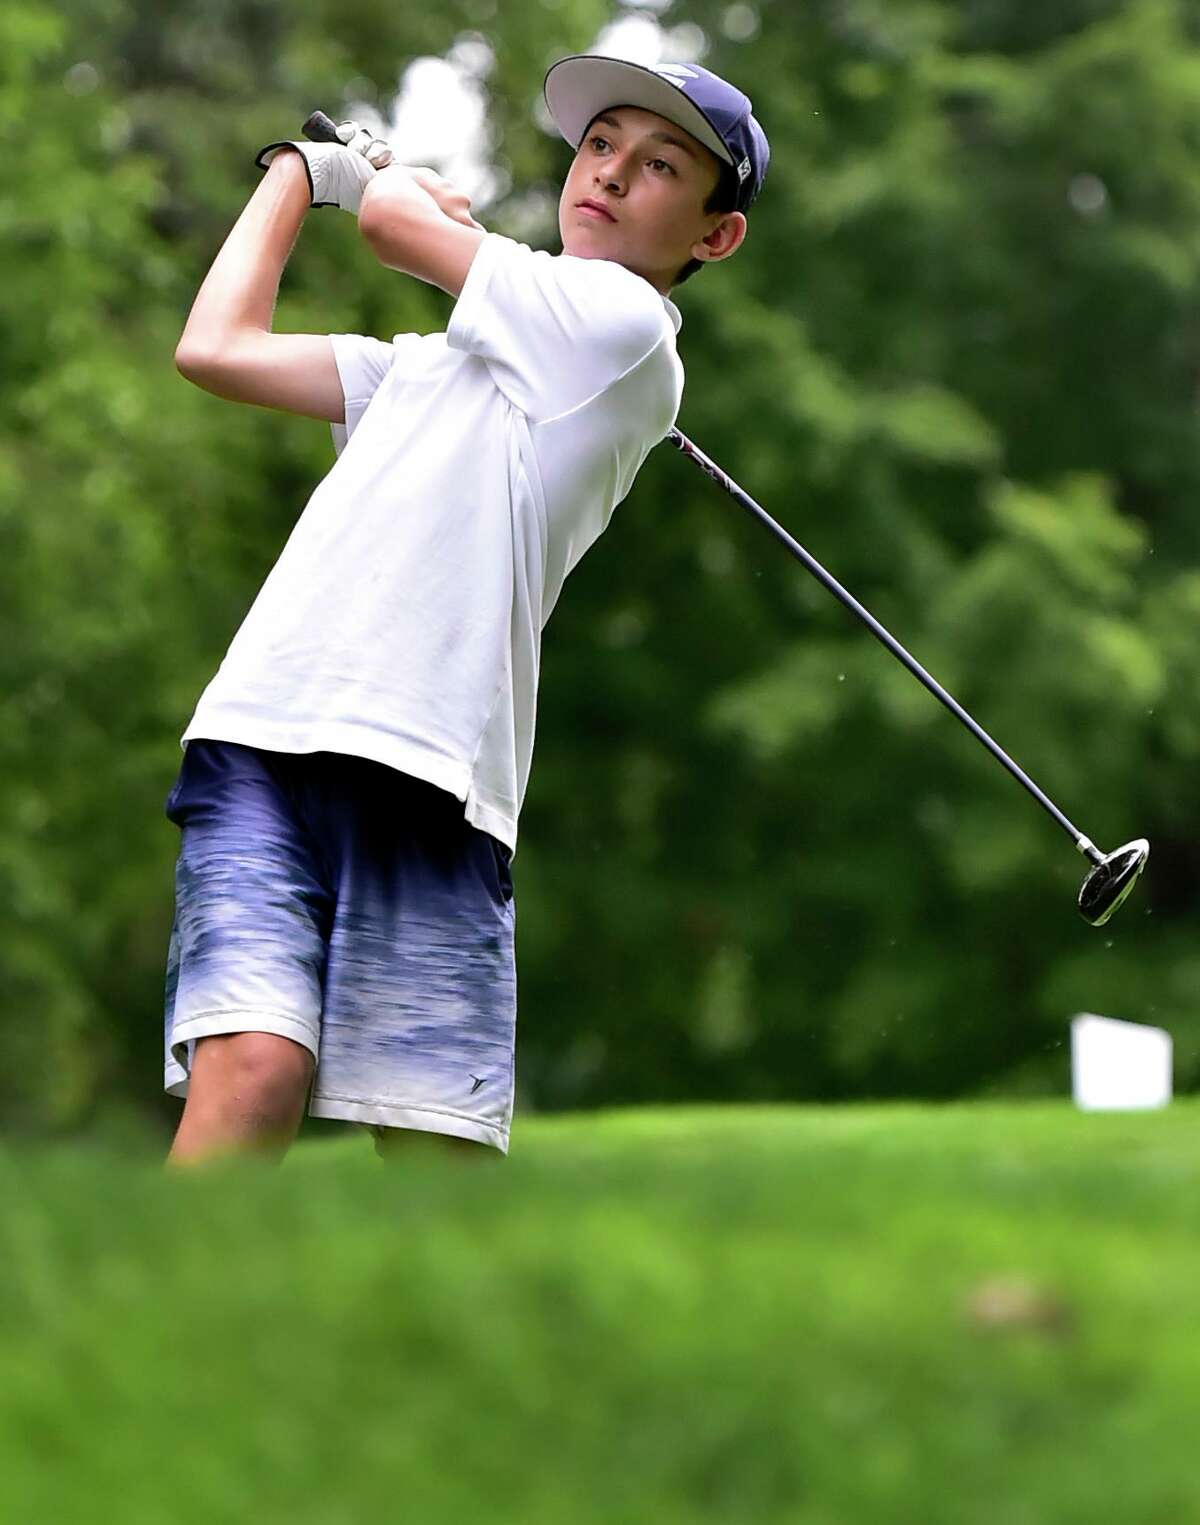 John Paul Malafronte, 13, uses a driver at the 9th hole during the first Chip Malafronte Memorial Golf Tournament For The Boy at Race Brook Country Club in Orange on Monday.